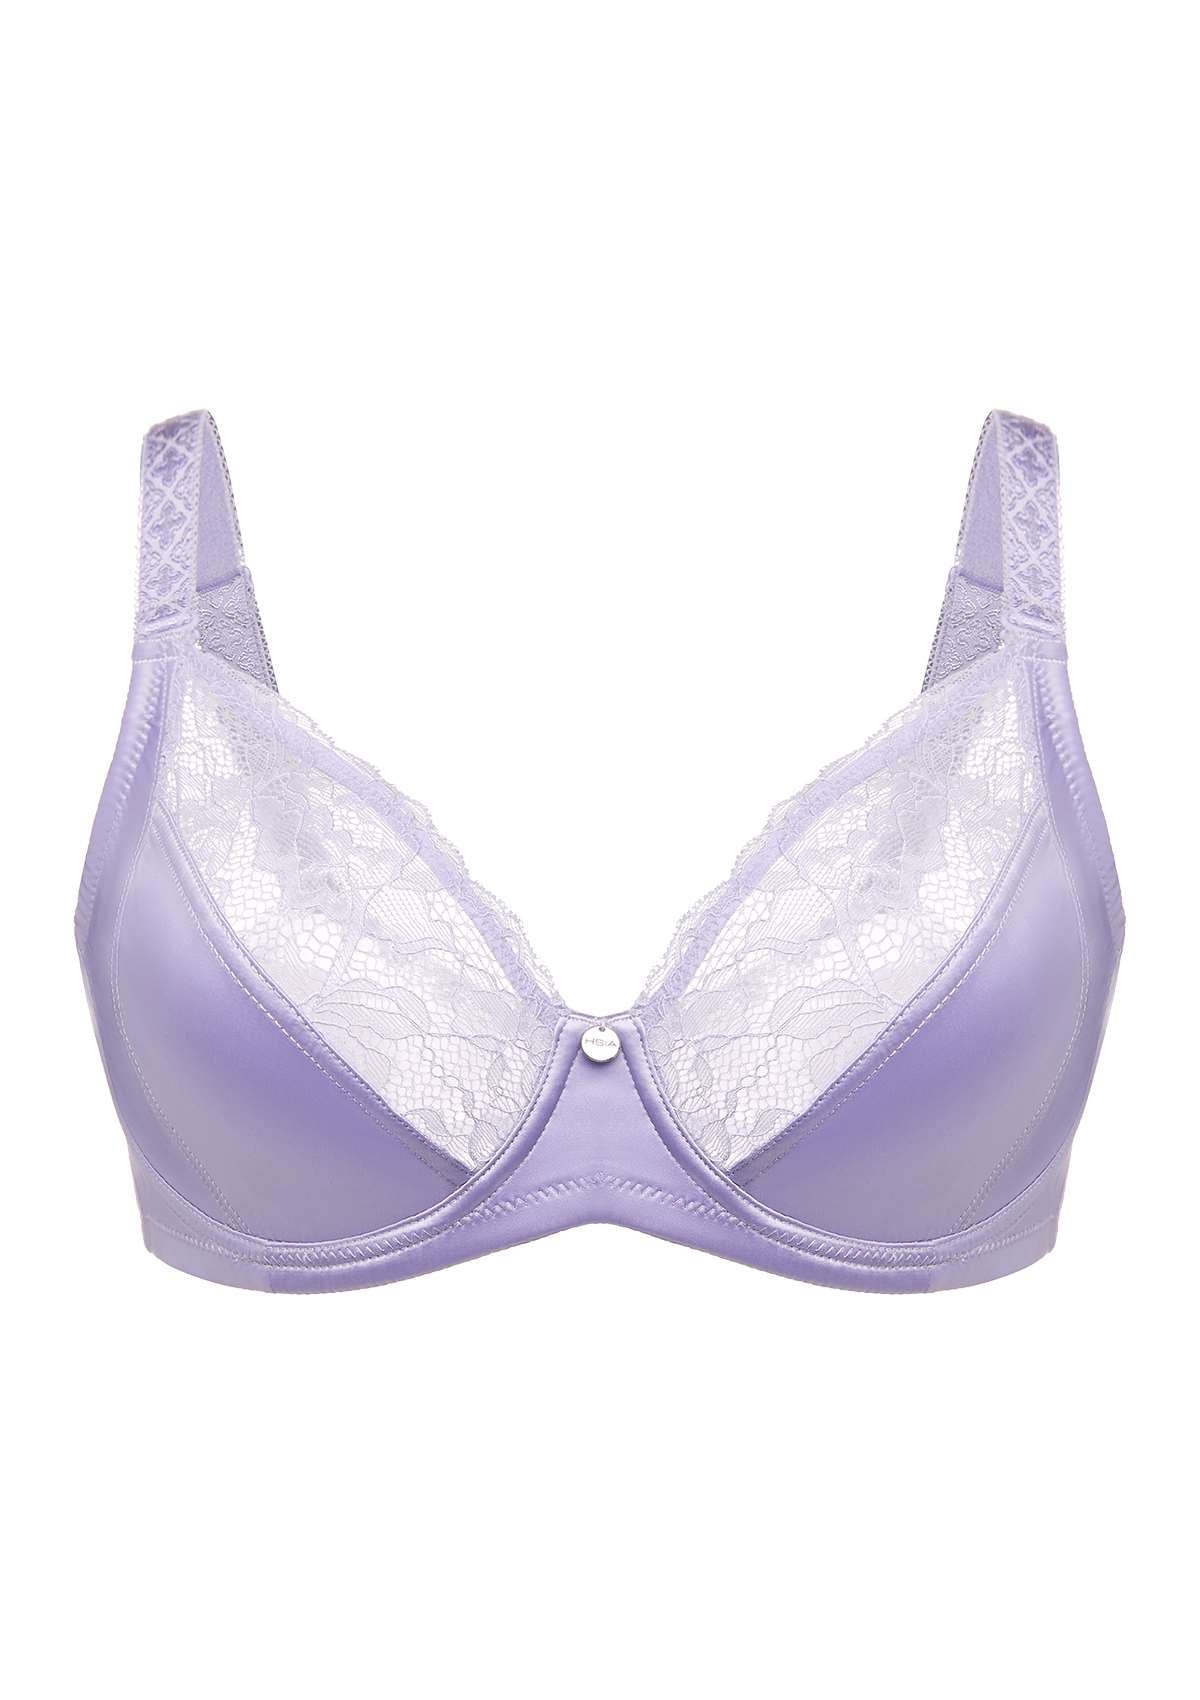 HSIA Foxy Satin Silky Full Coverage Underwire Bra With Floral Lace Trim - Purple / 36 / D